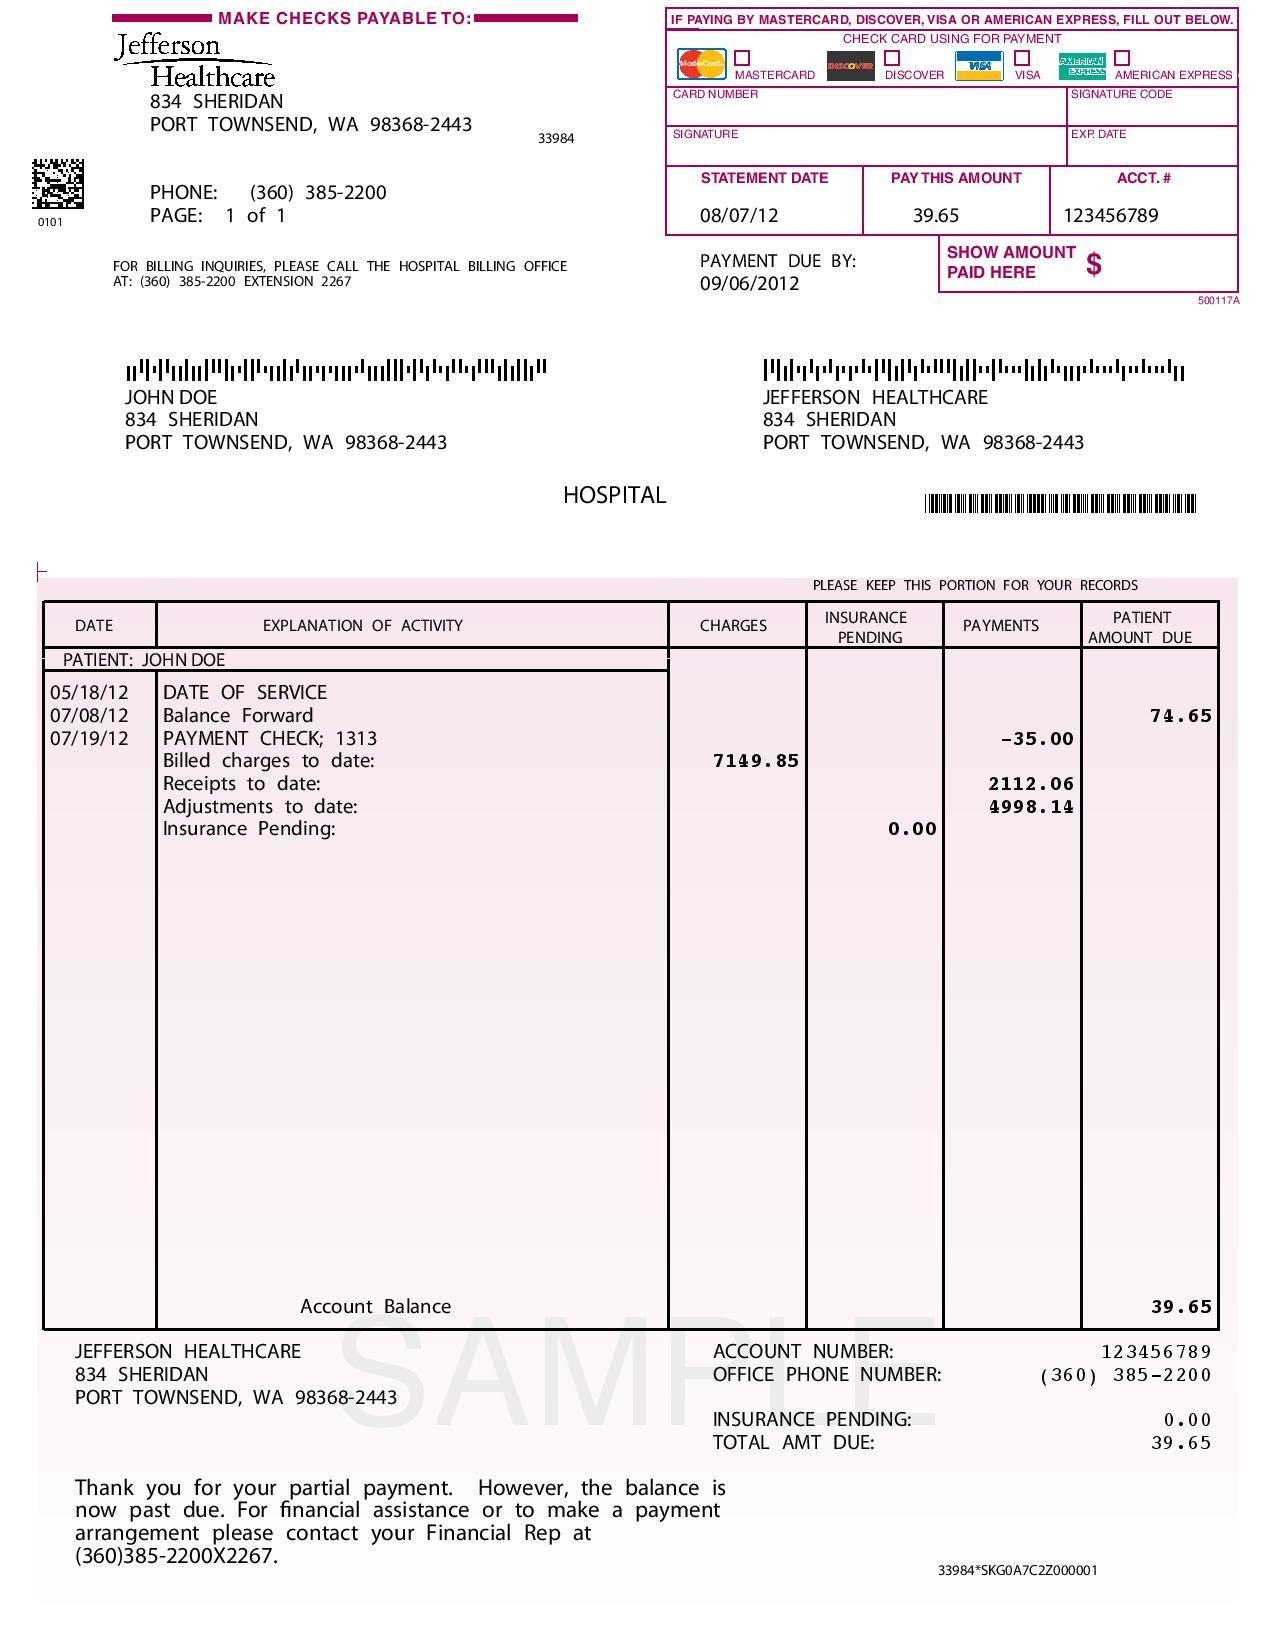 Best Samples Of Company Receipt Invoice Template Ideas